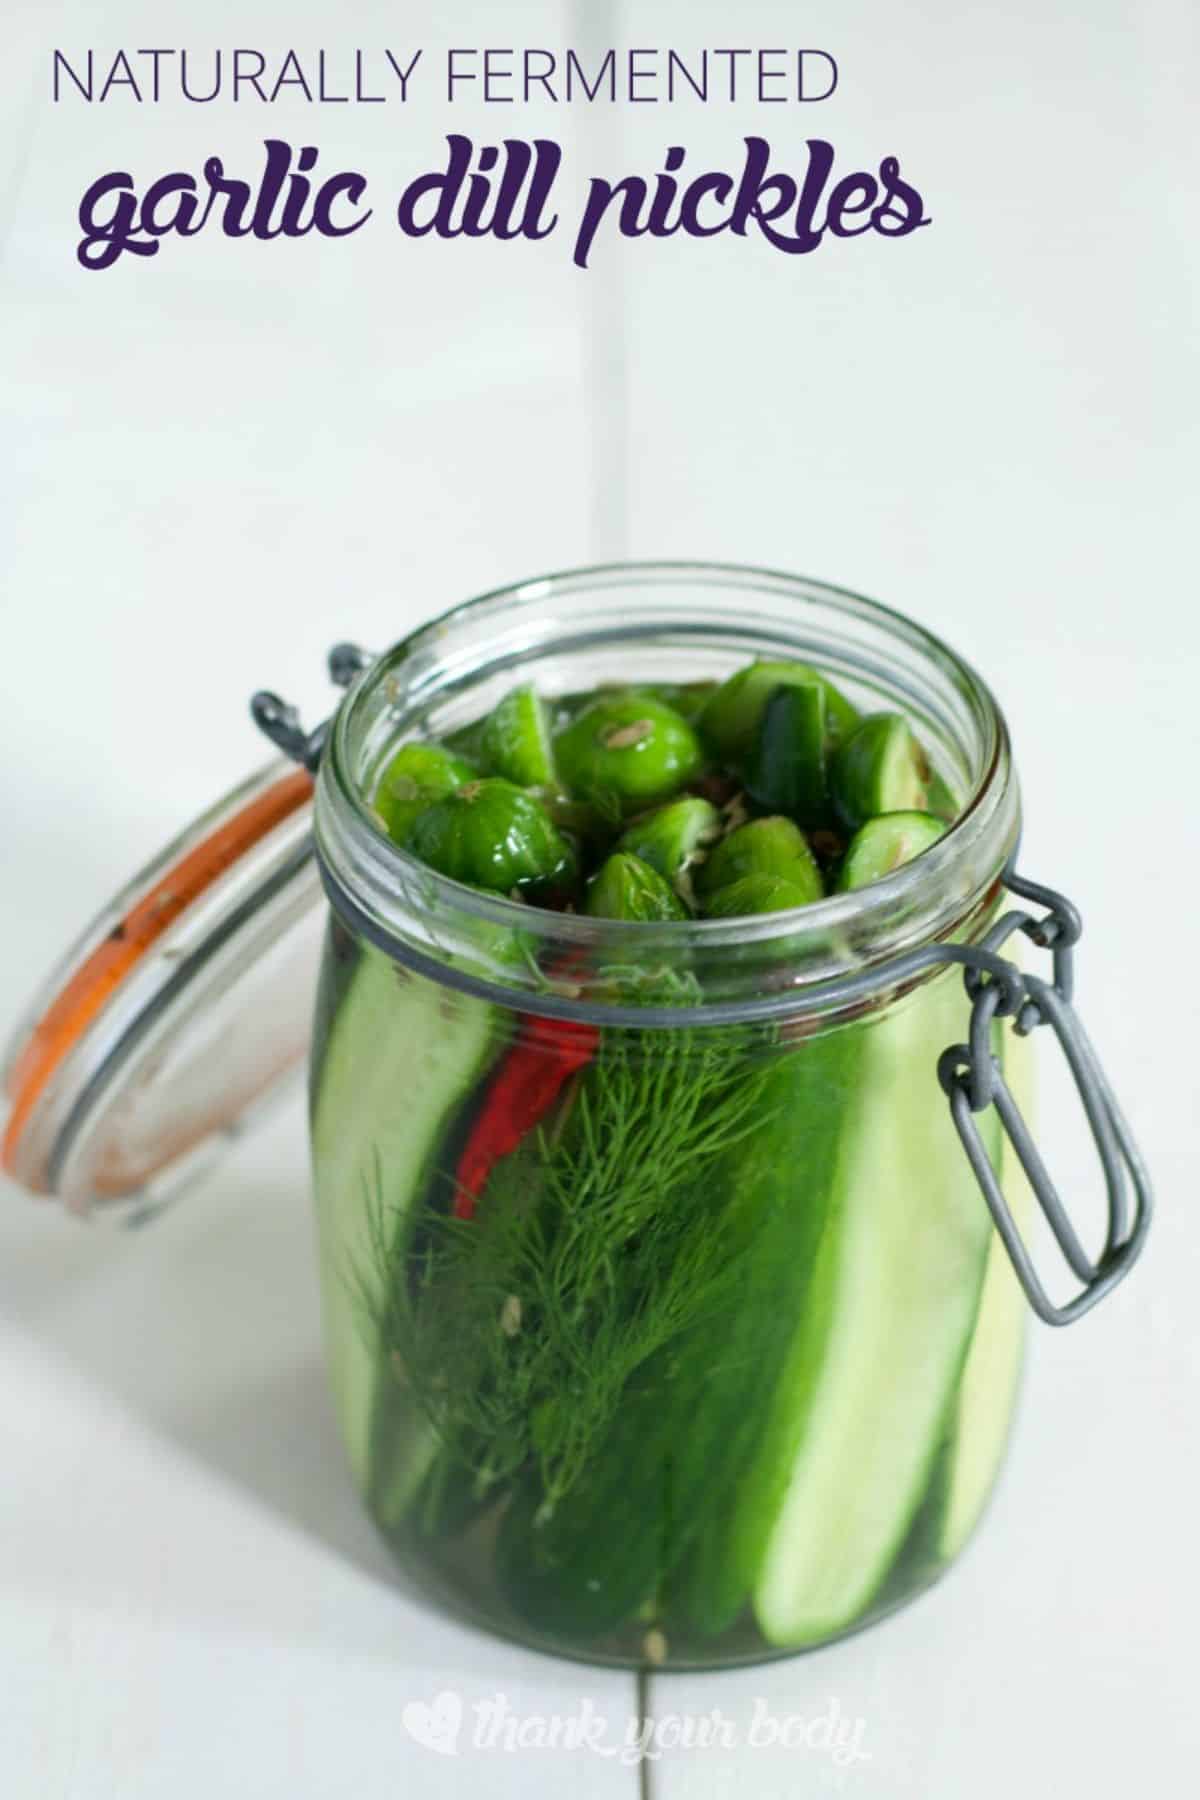 Fermented dill pickles in a glass jar.